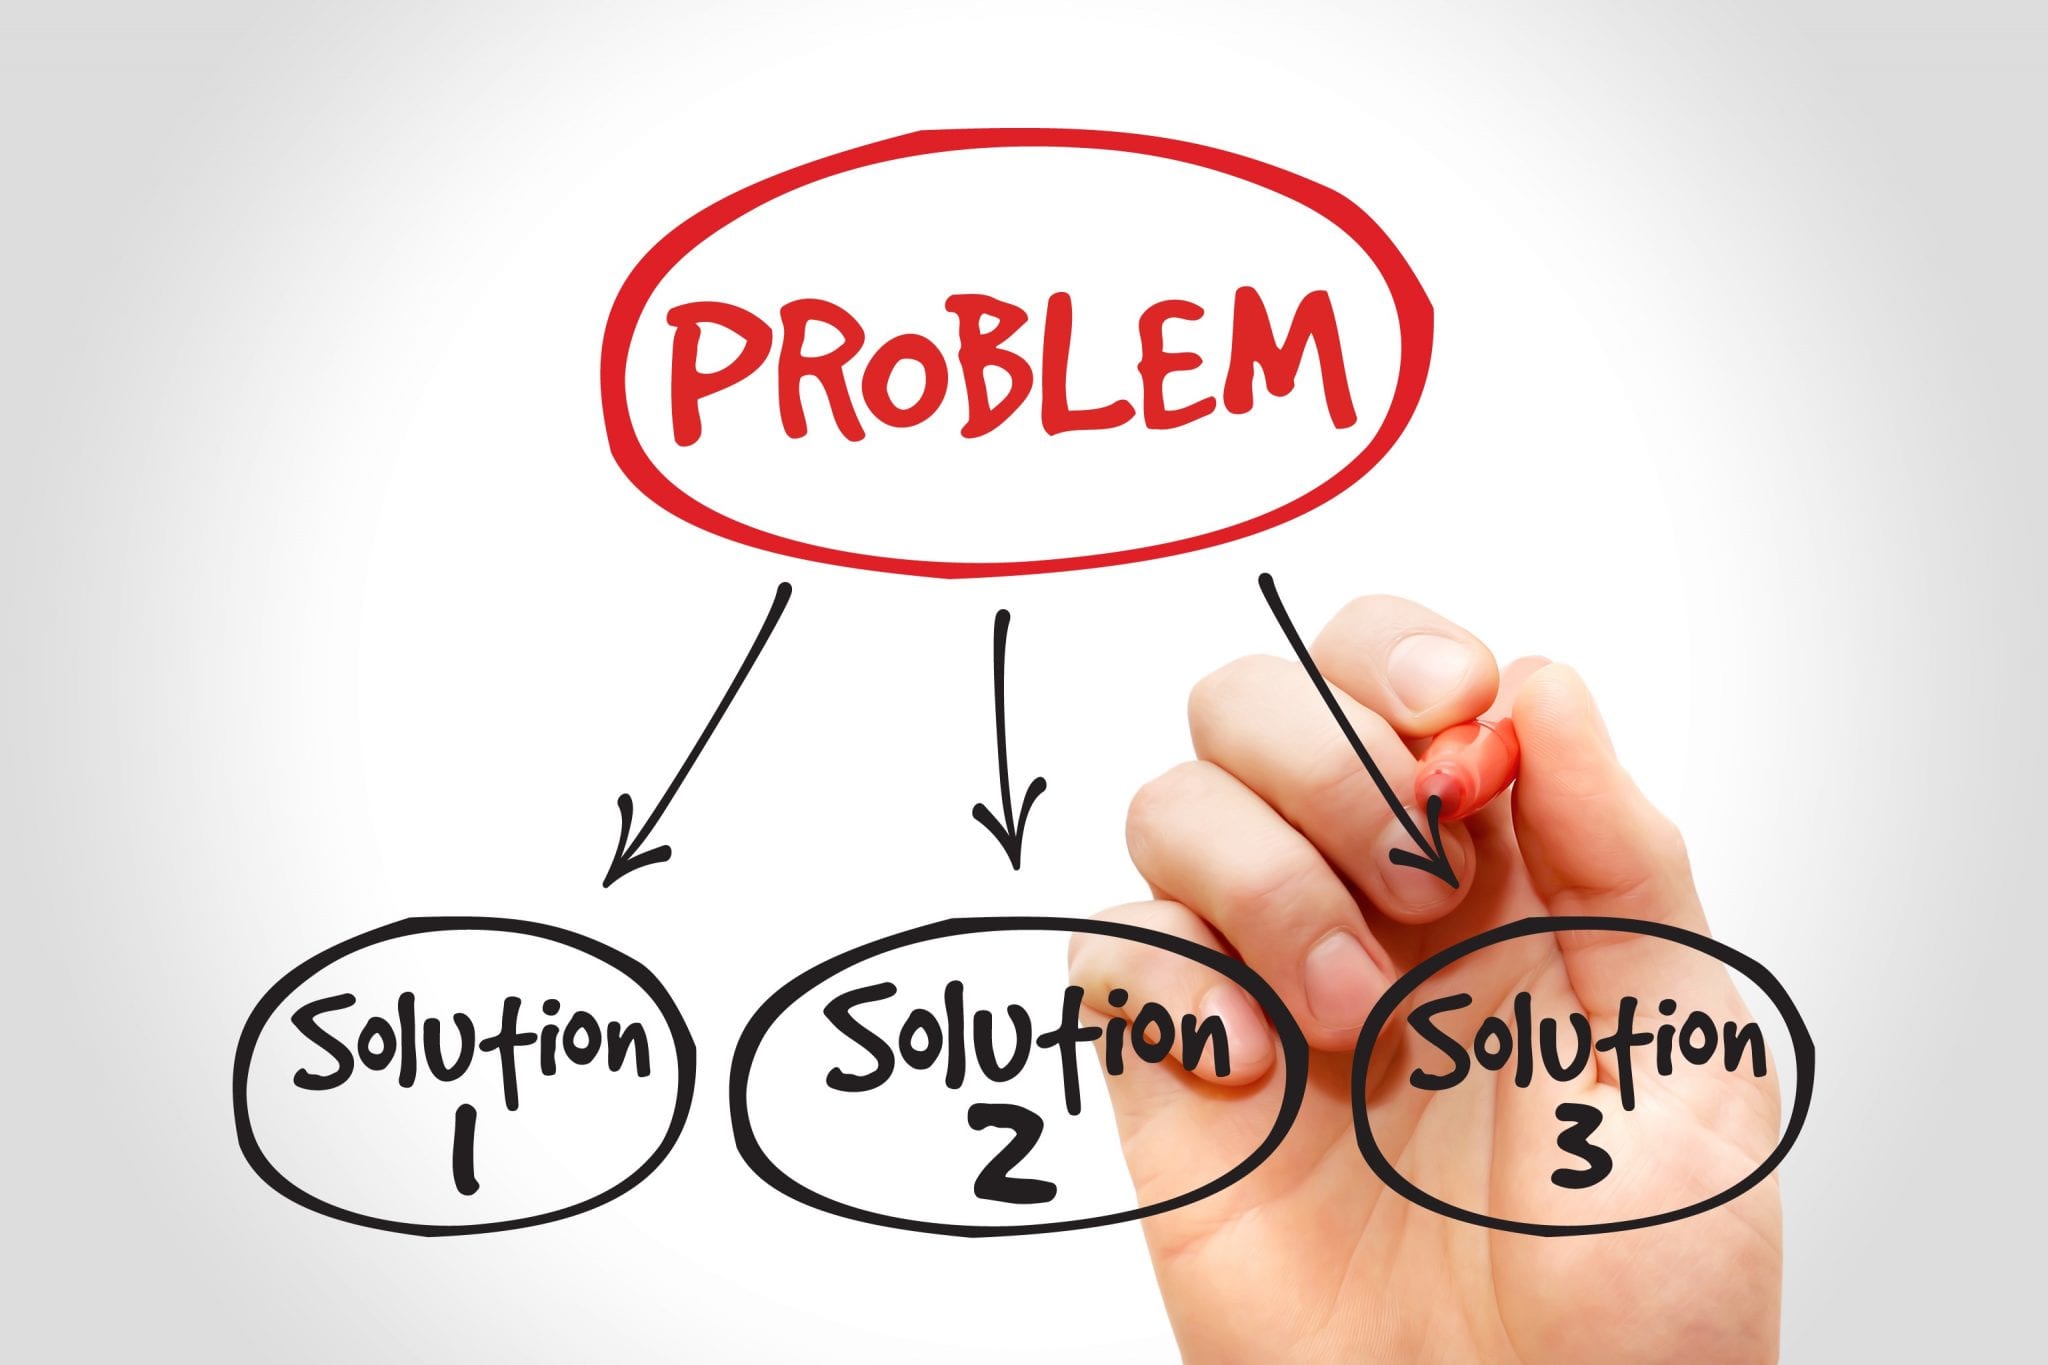 TRAINING ONLINE PROBLEM SOLVING AND DECISION MAKING